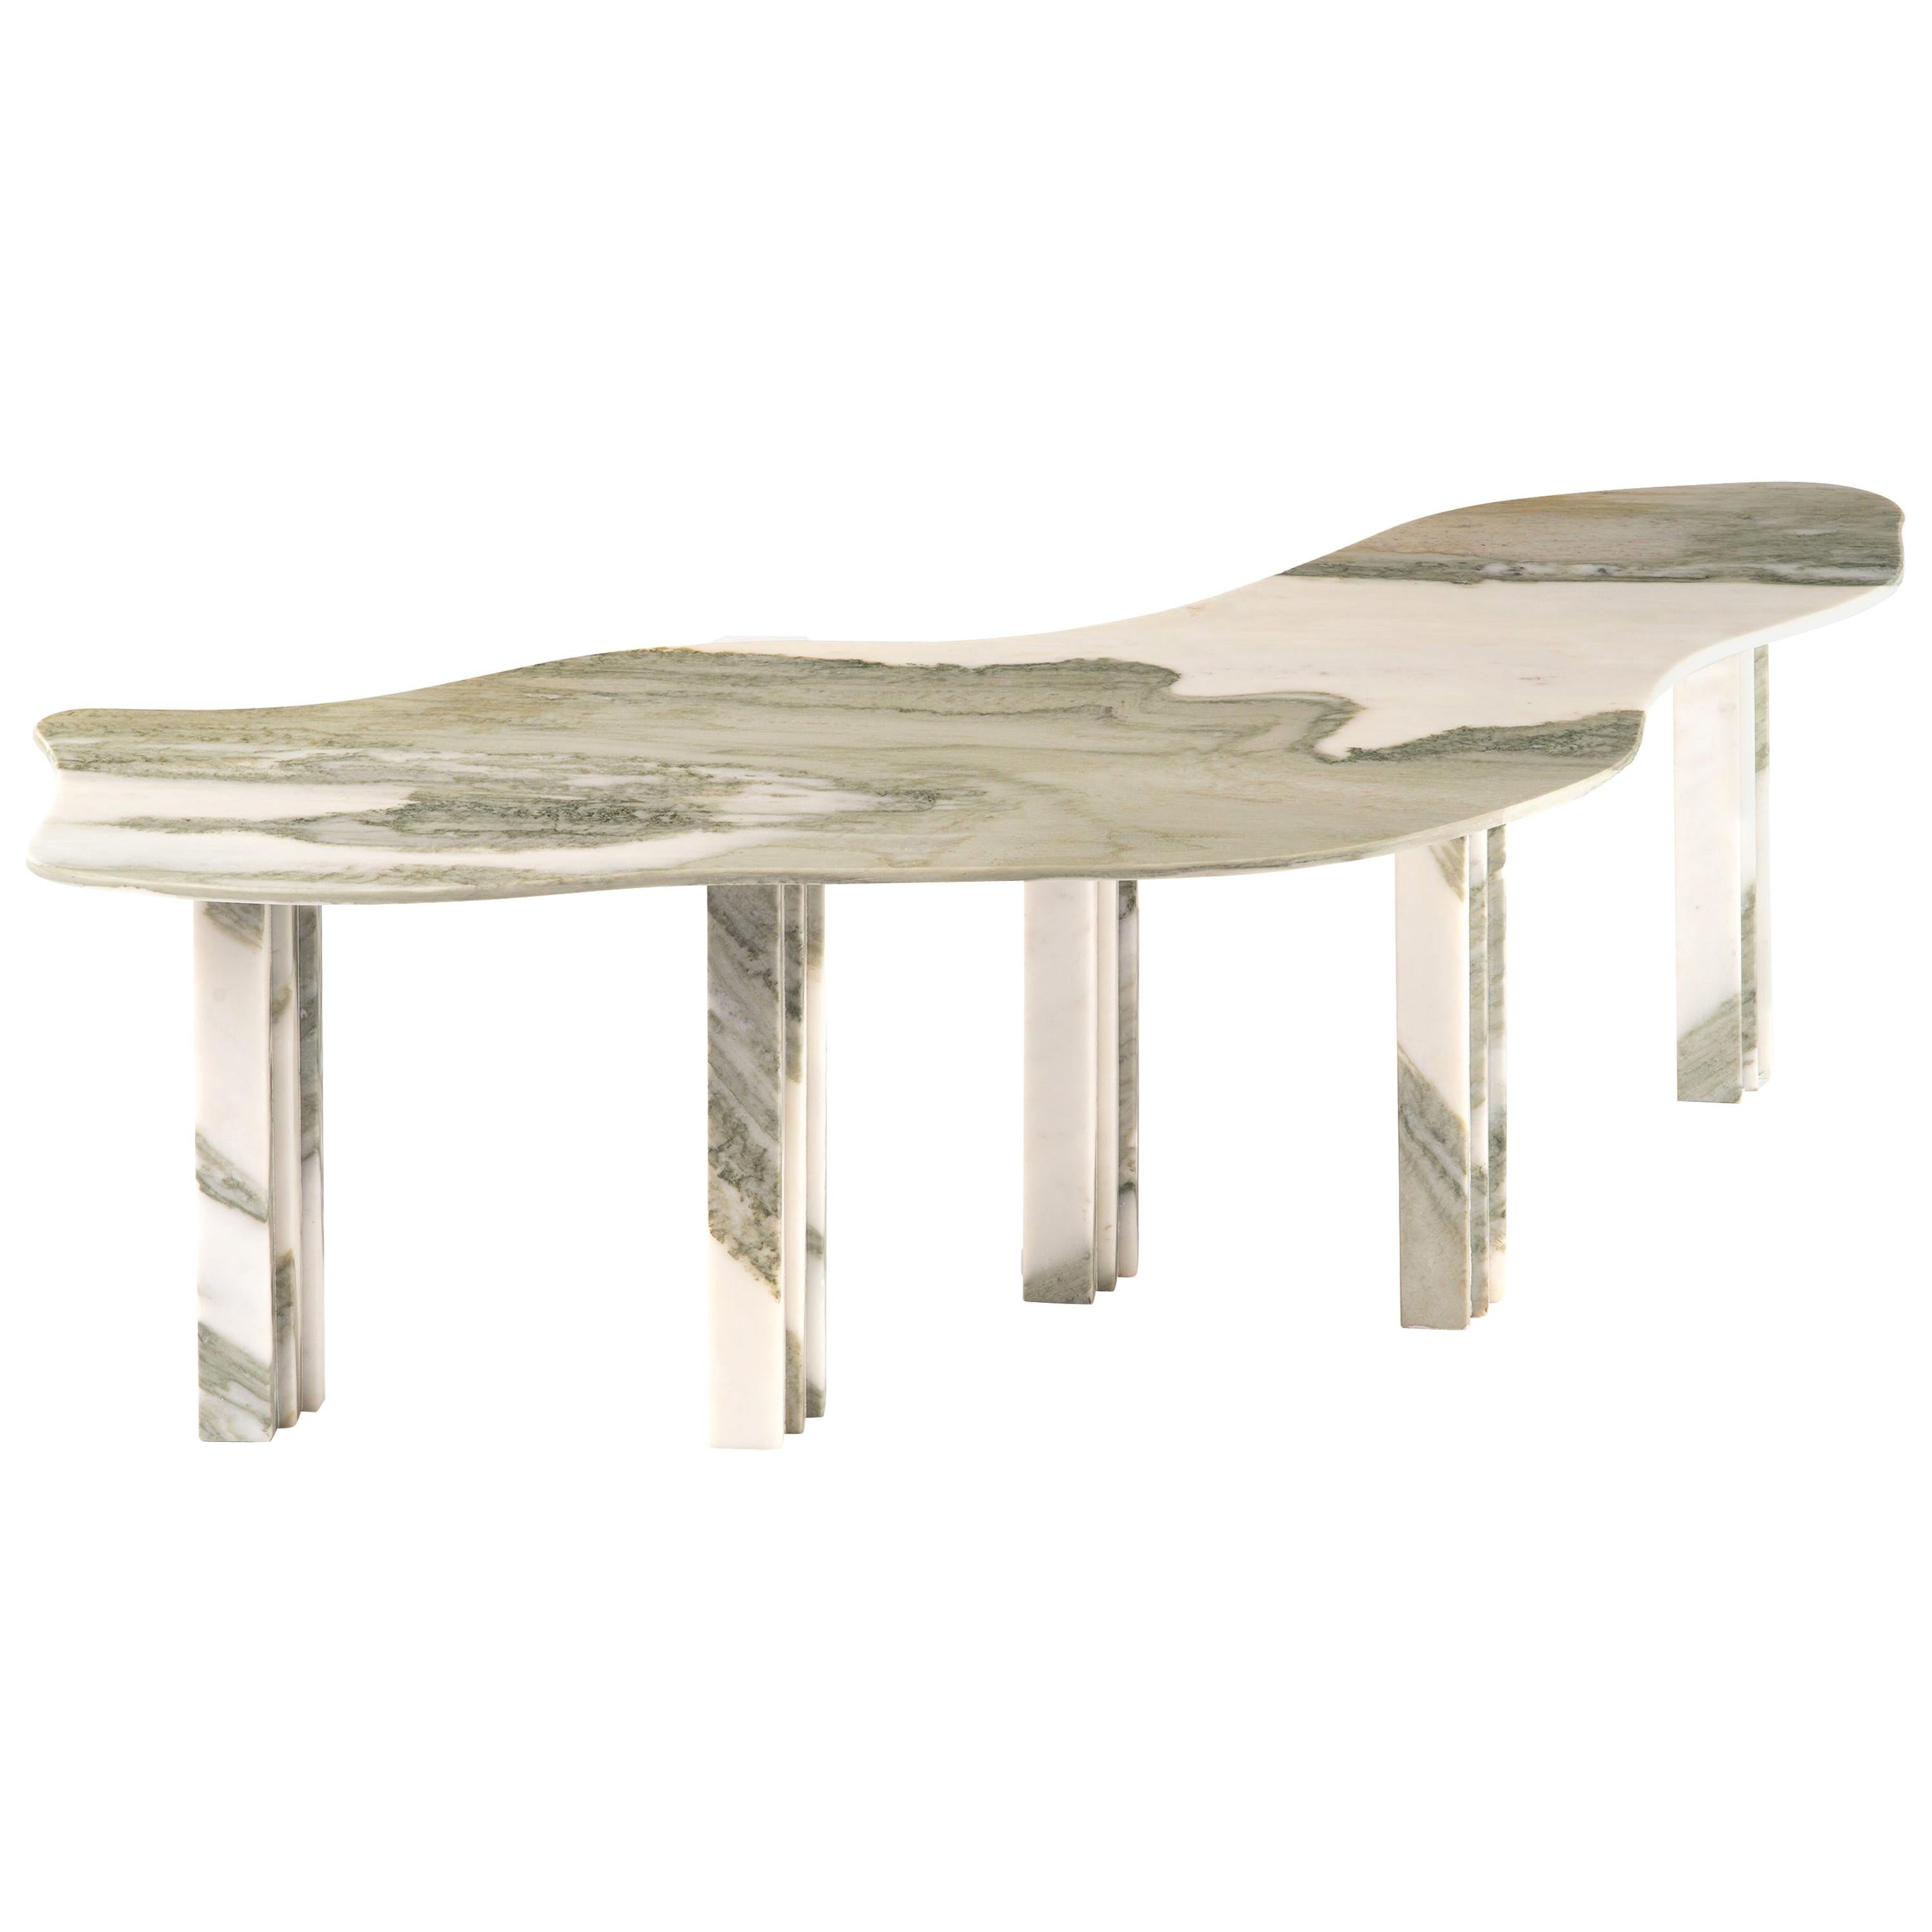 Bicolor sculptural marble coffee table signed by Lorenzo Bini
Measures: 125 x 50 x H 37 cm
Materials: Calacatta

Also available as a Dining table 250 x 100 x H 73.5 cm


SIX TABLEAUX is a series of marble tables designed by Lorenzo Bini and